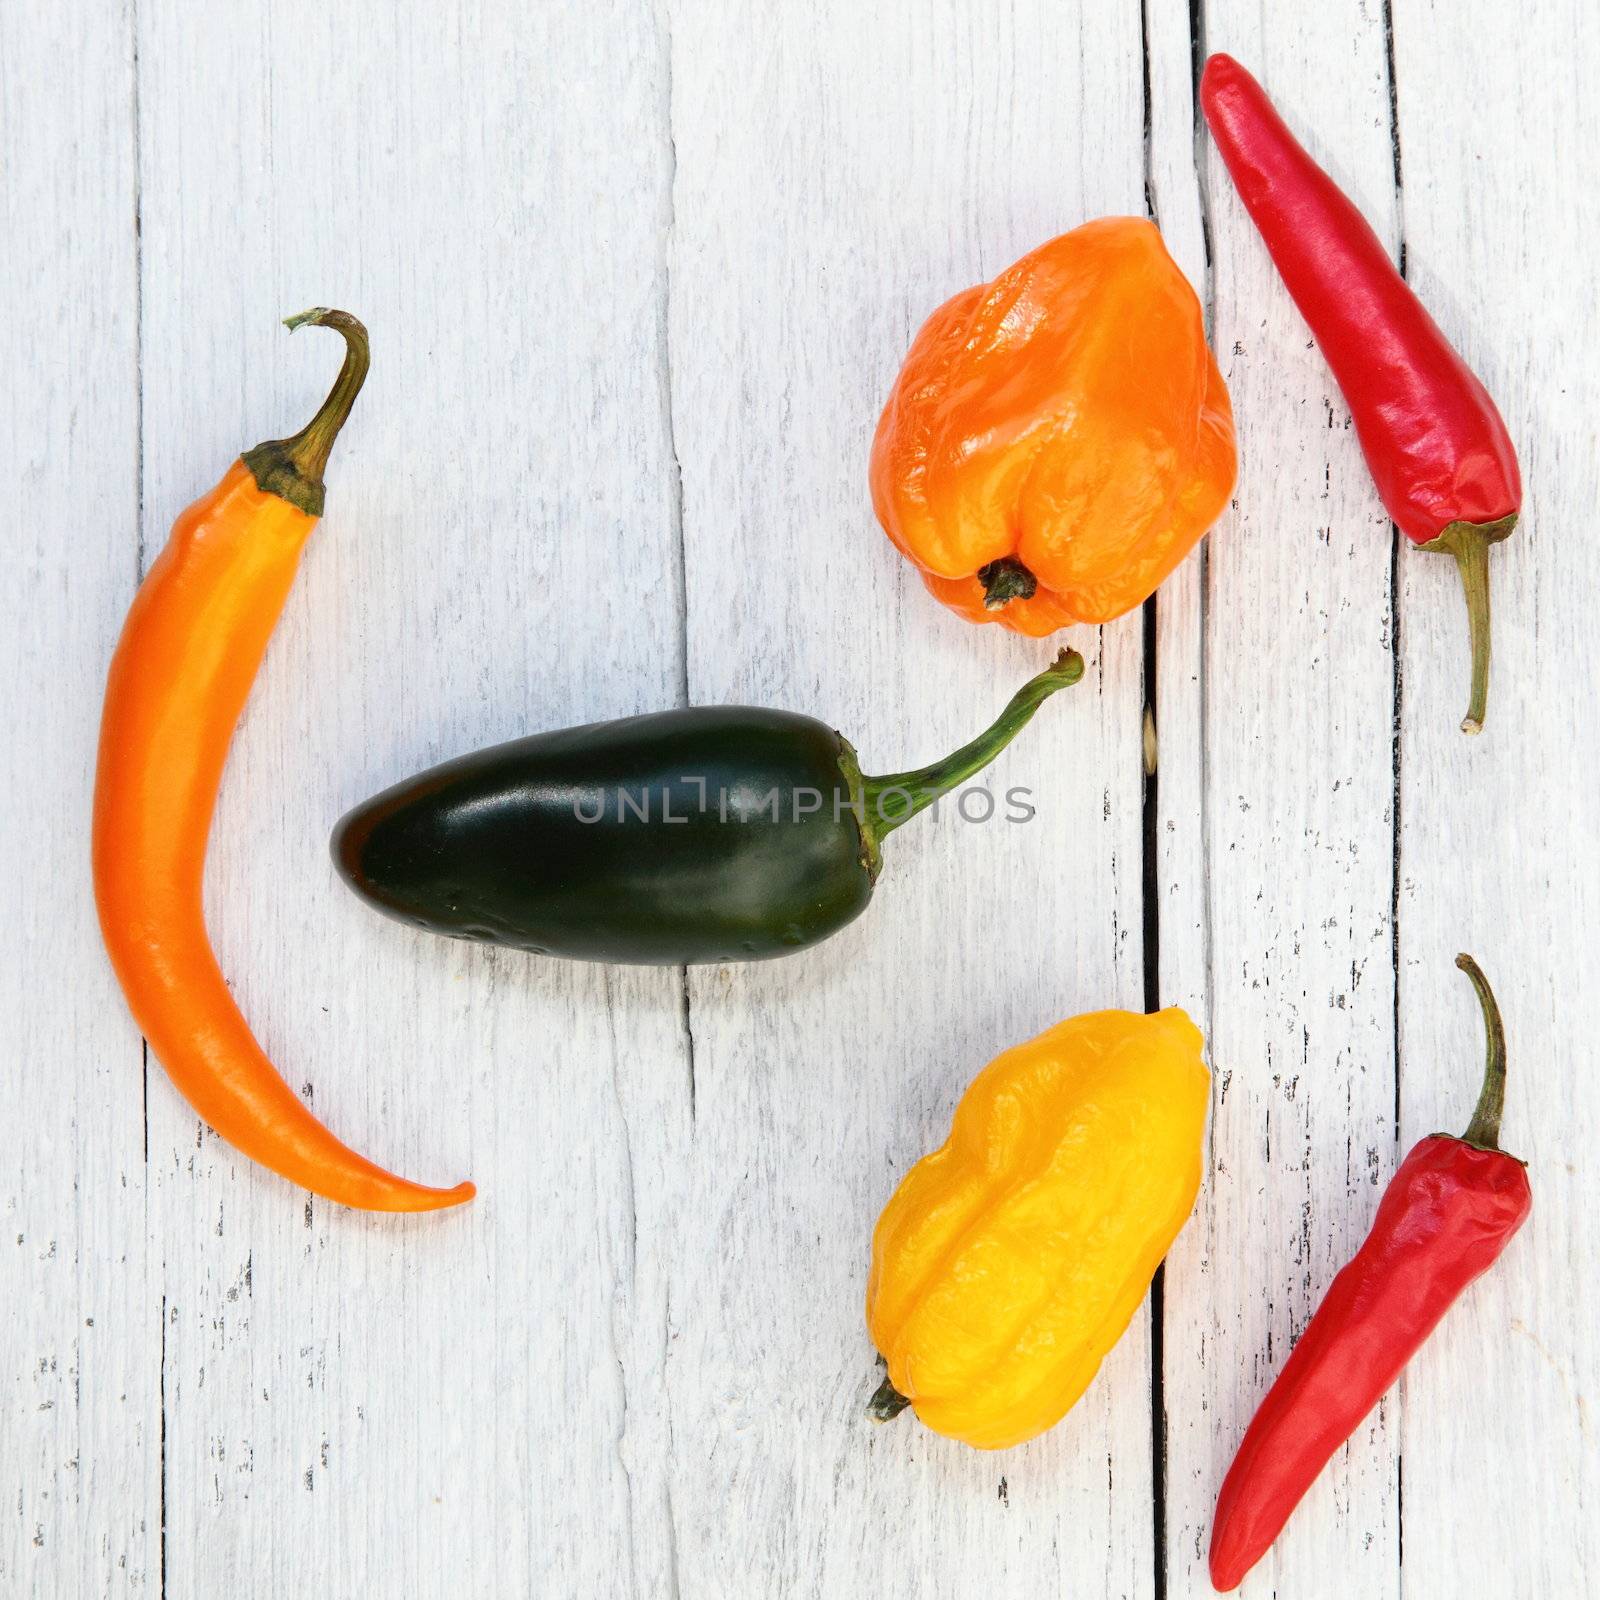 Colourful bell and chilli peppers by Farina6000